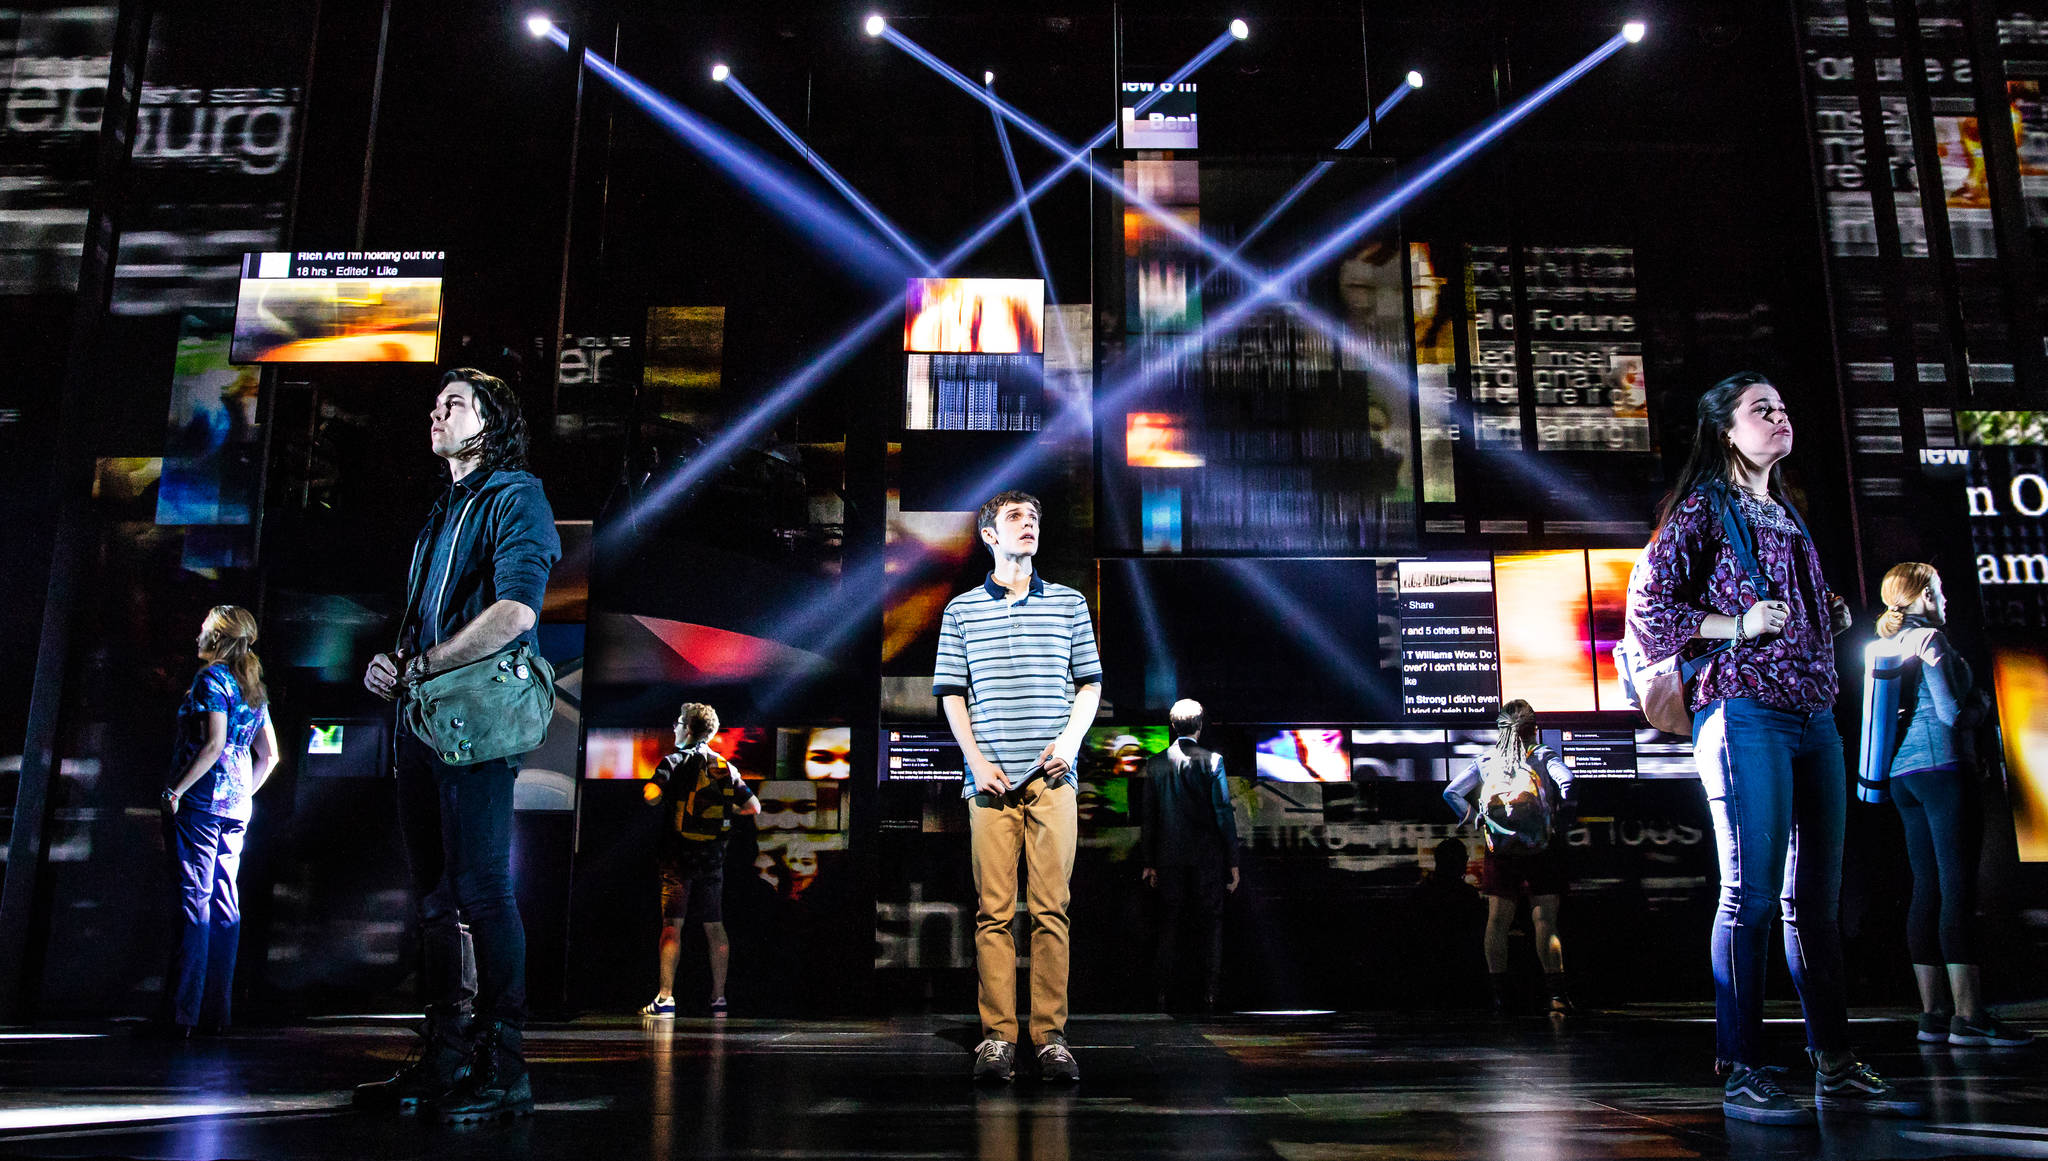 &lt;em&gt;Dear Evan Hansen&lt;/em&gt; takes the Seattle stage for the first time in January. Photo by Matthew Murphy